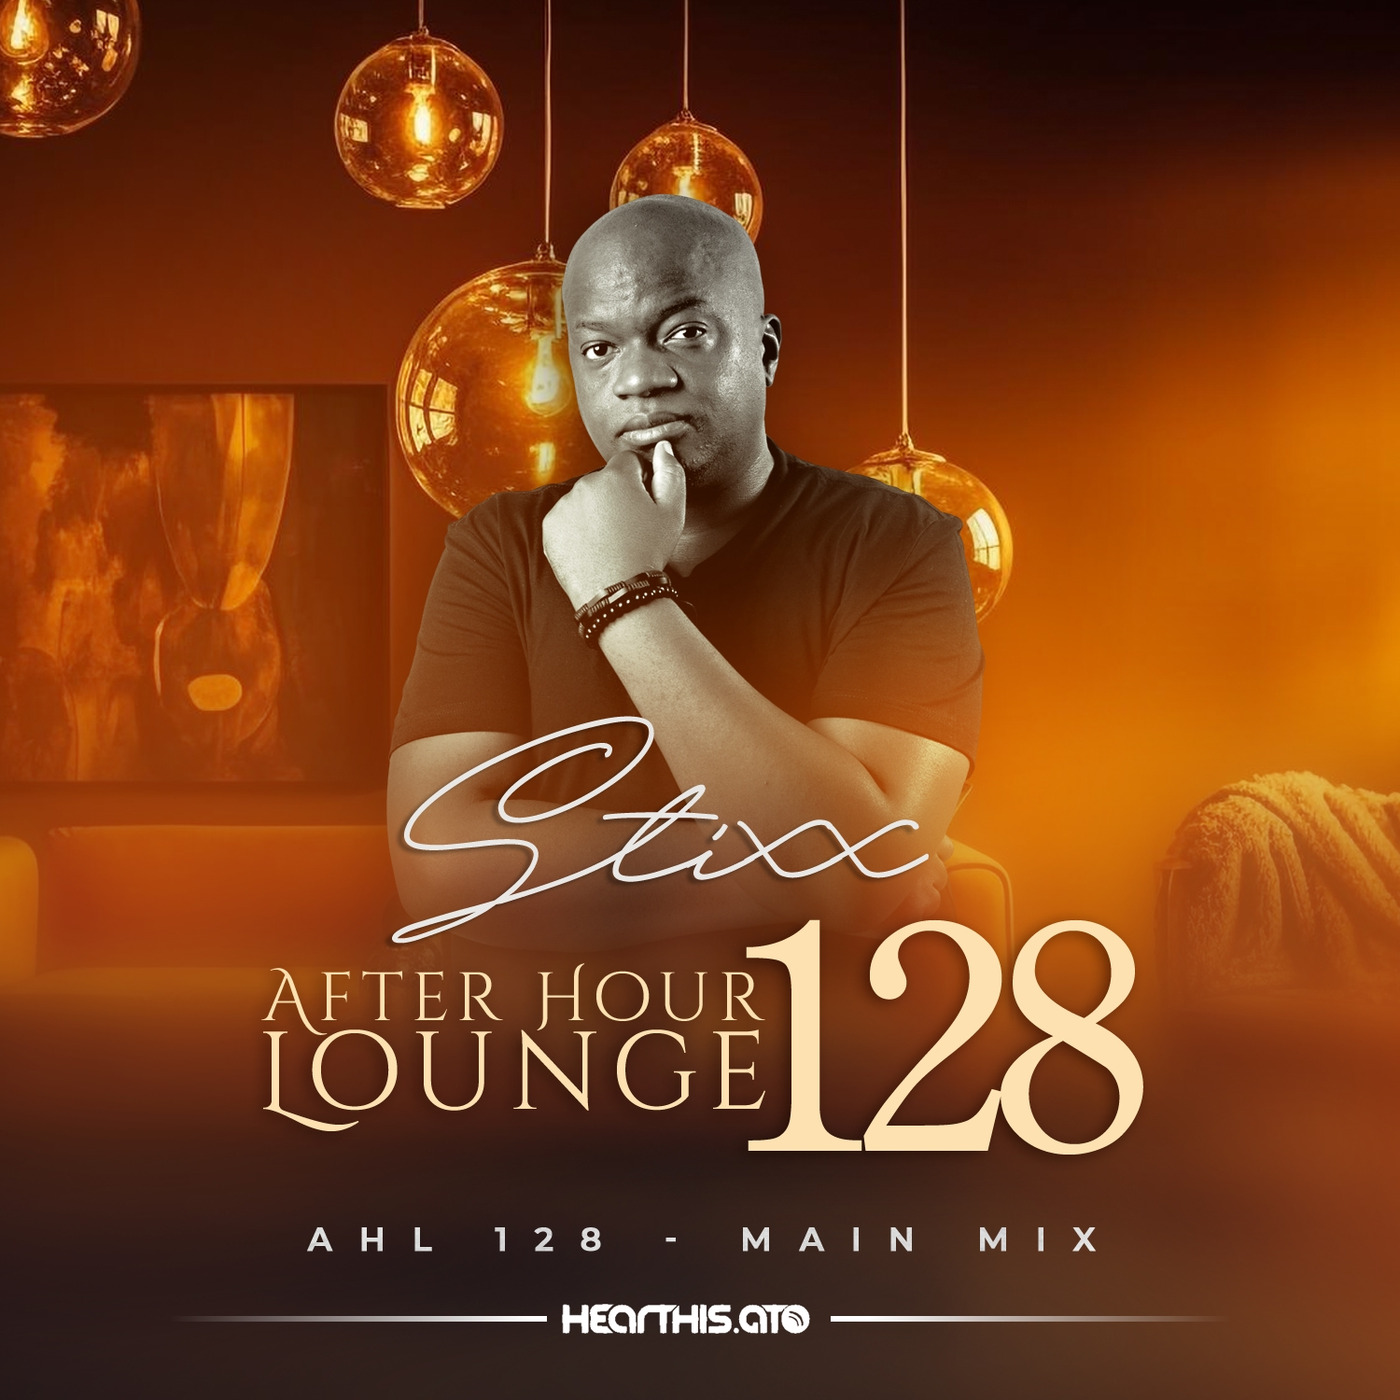 After Hour Lounge 128 (Main Mix) mixed by Stixx